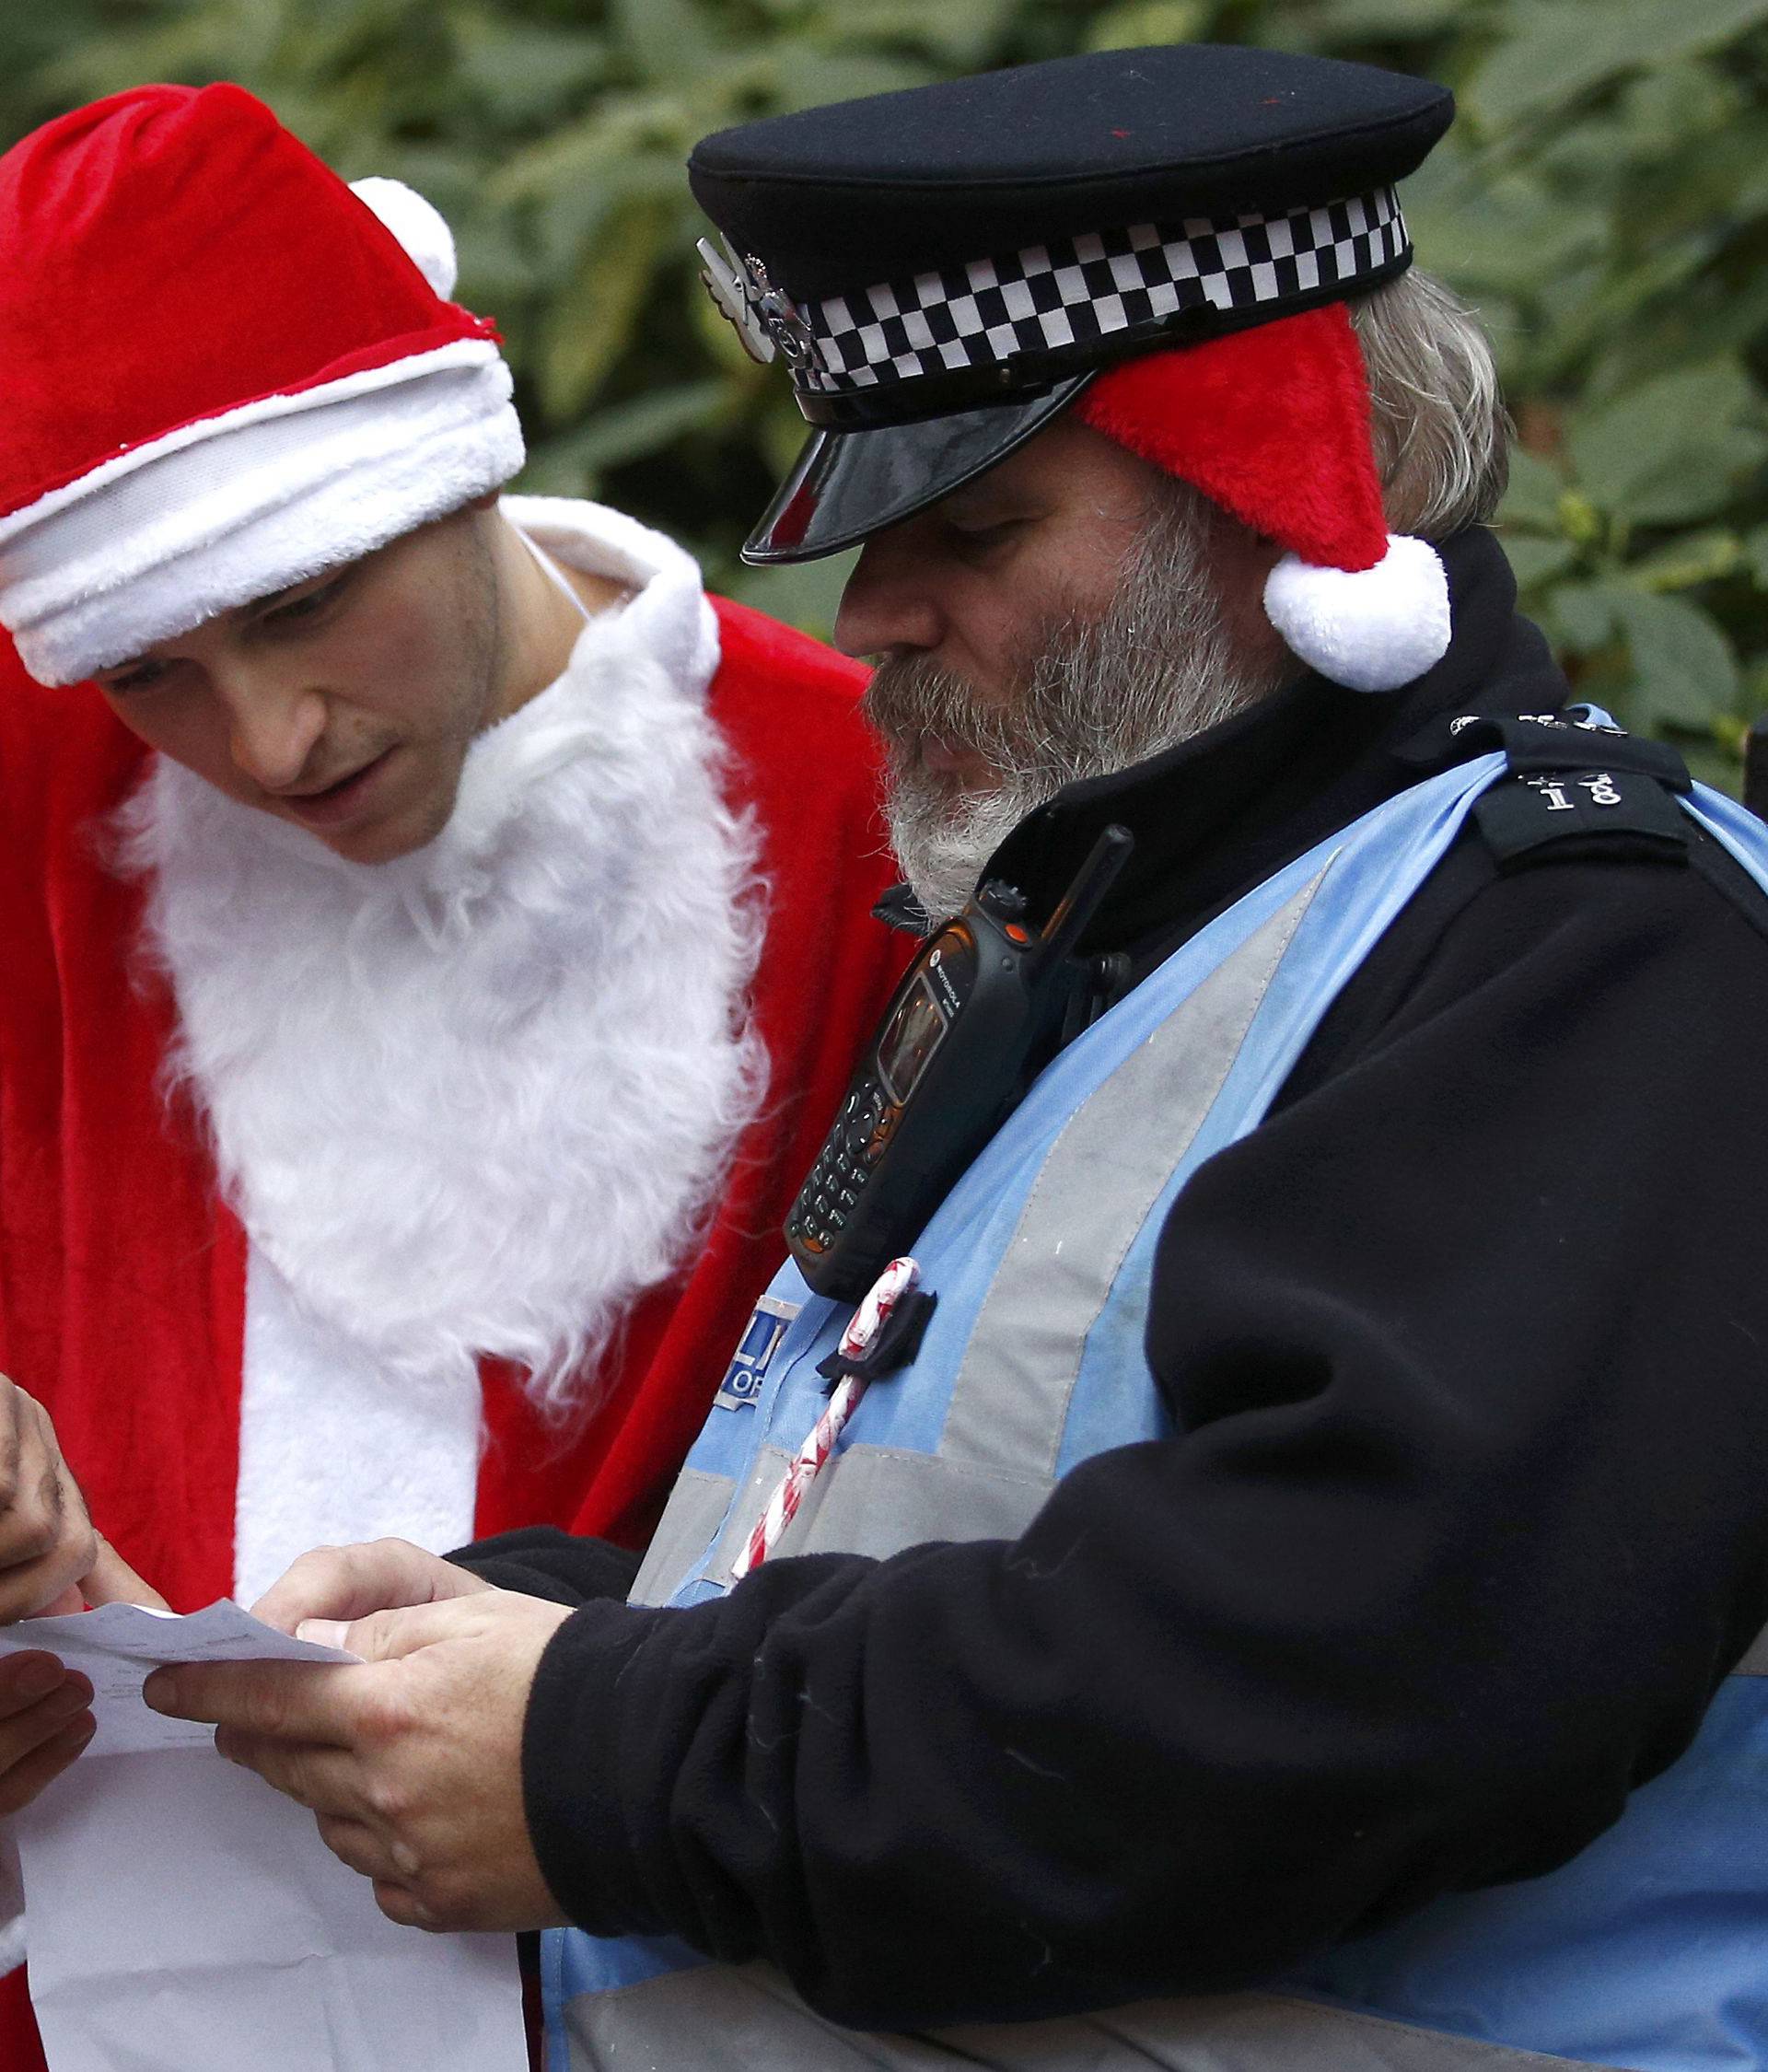 A man dressed as Santa Claus talks to a Police officer during the Santacon event in London